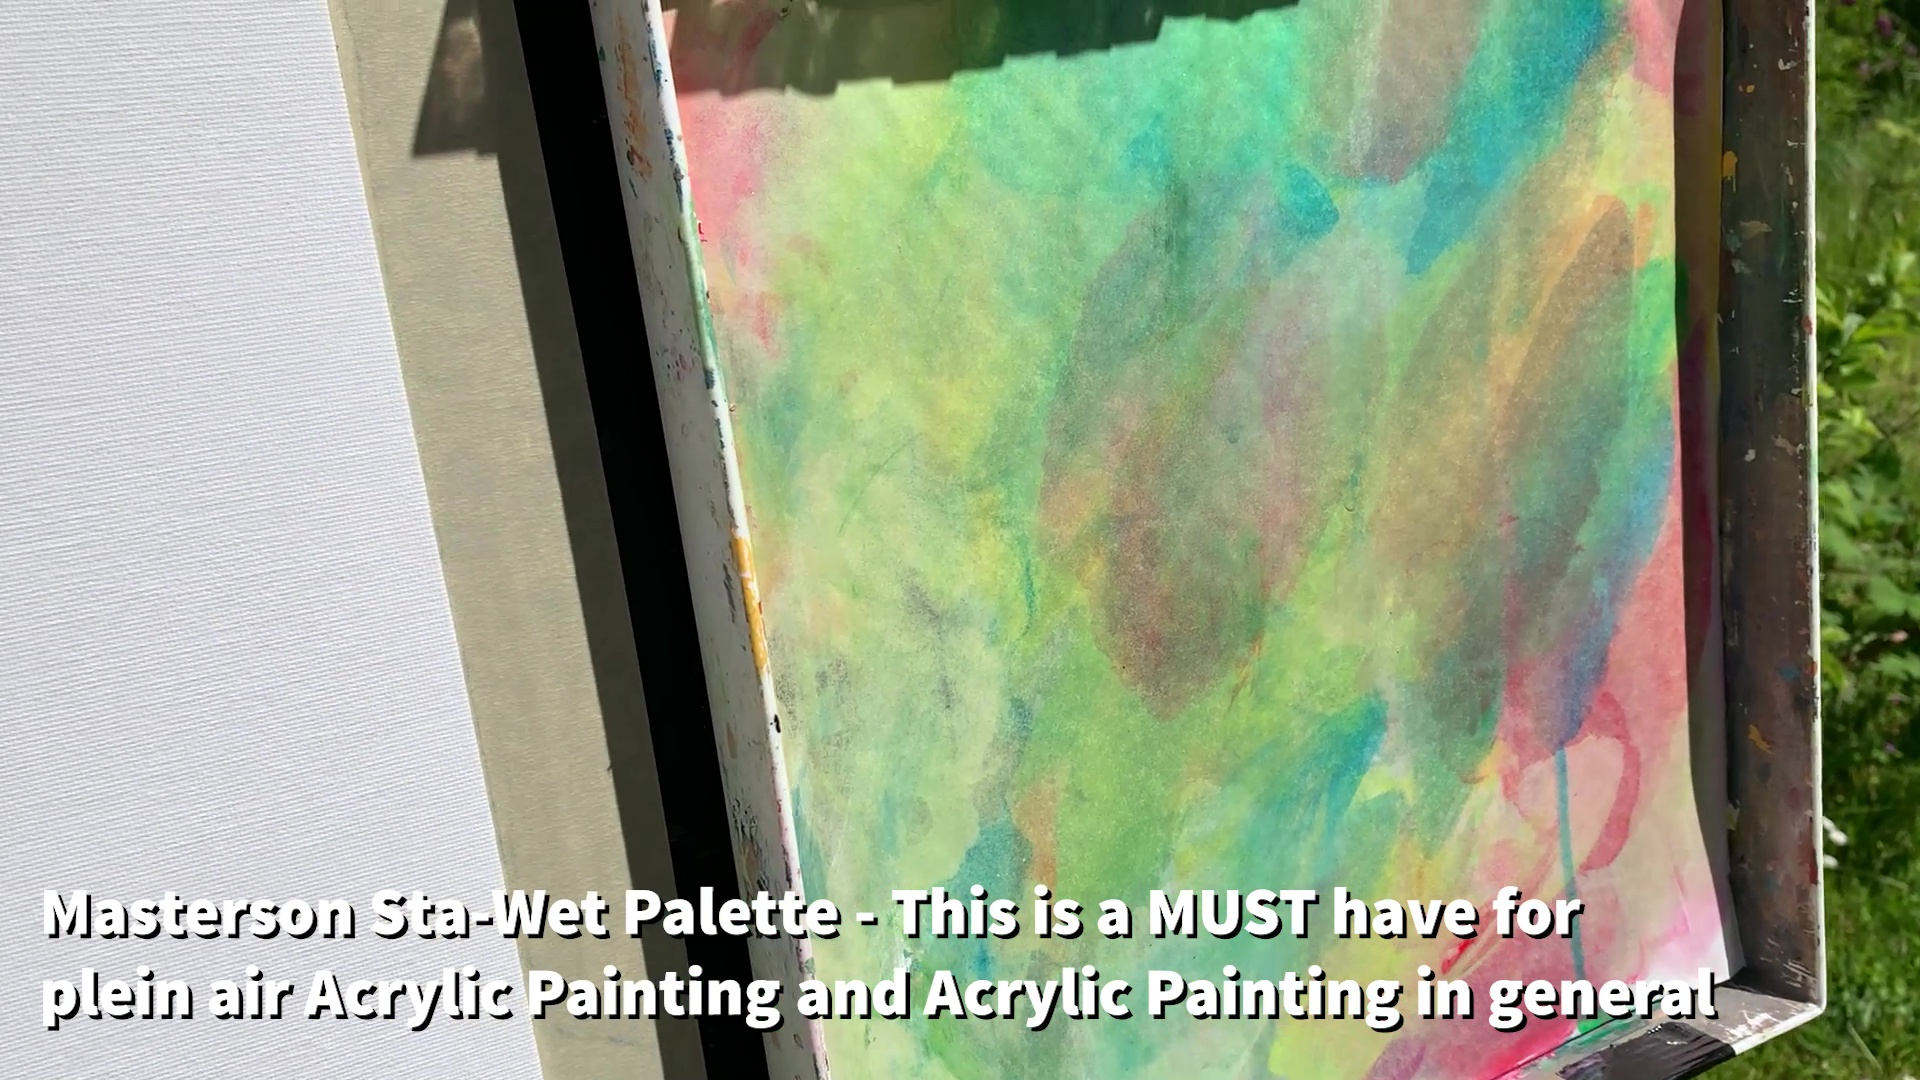 masterson sta-wet palette for acrylic painting